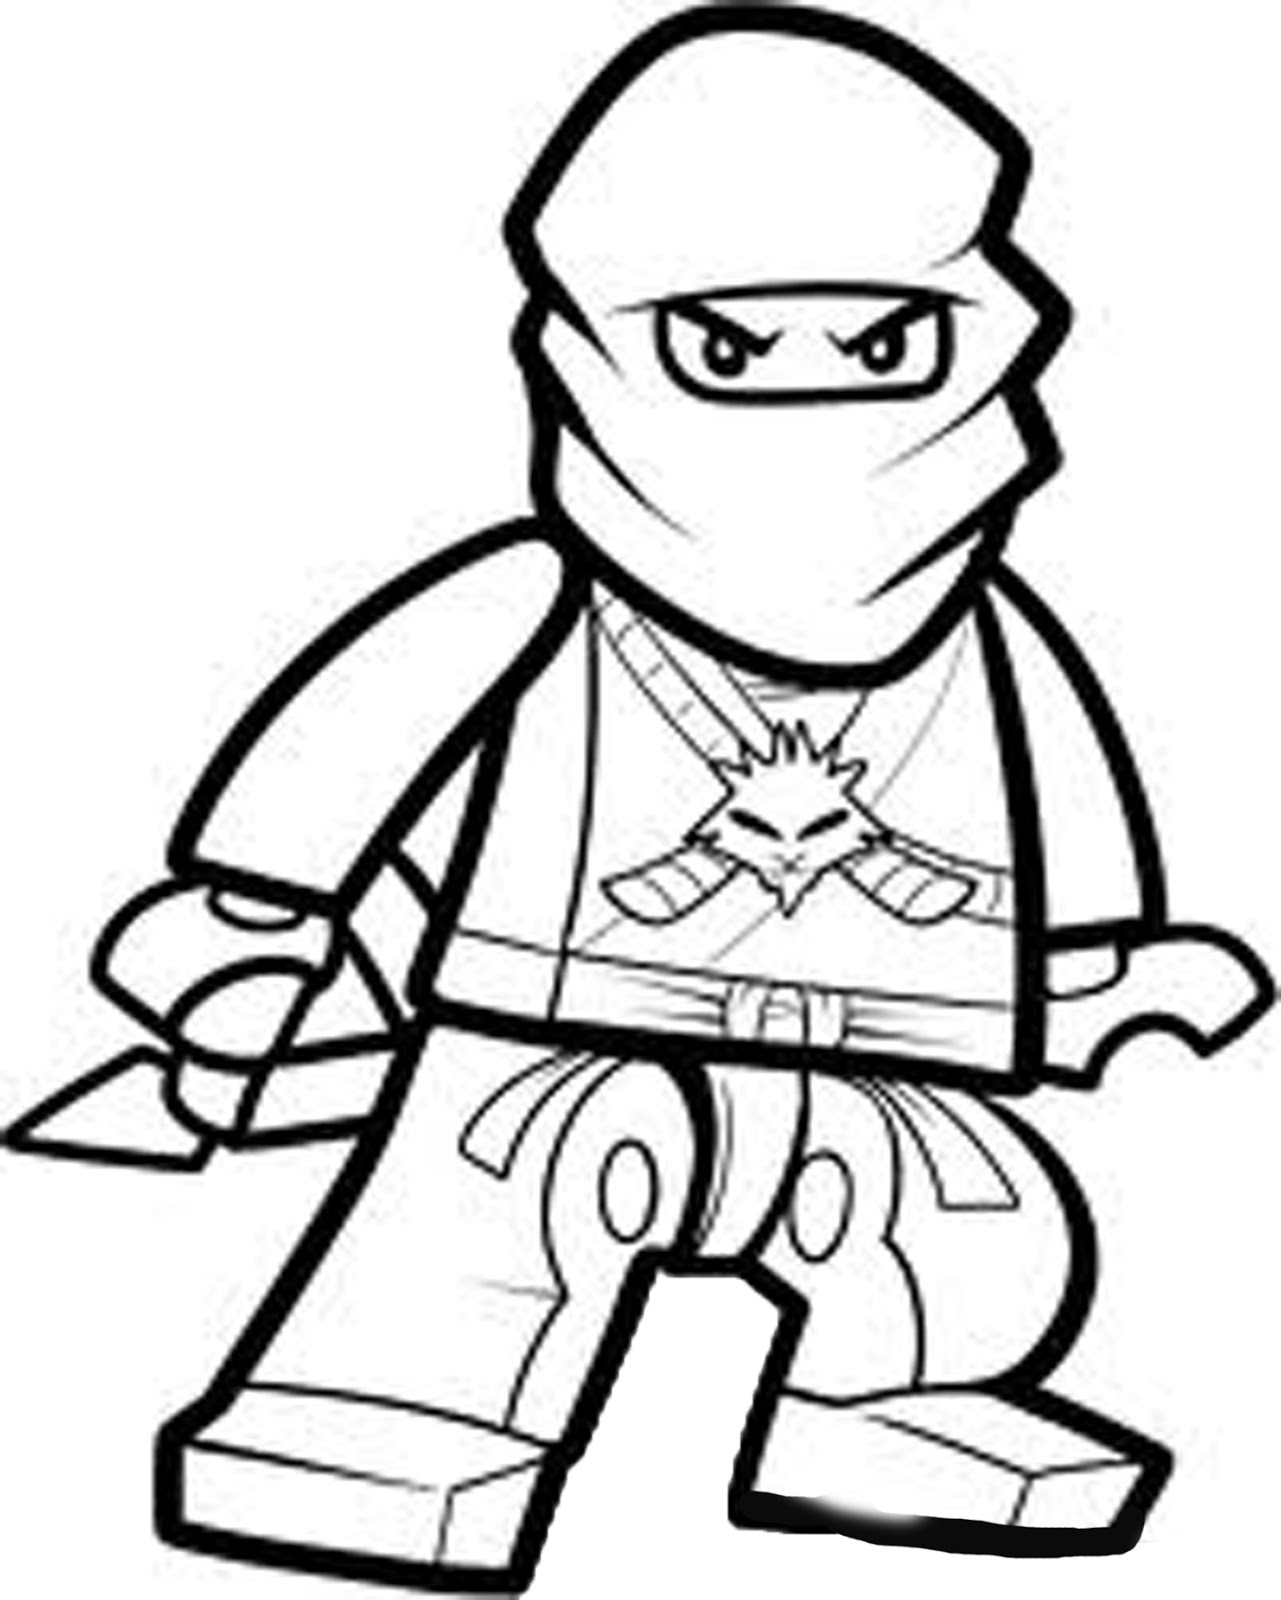 Free Personalized Coloring Pages For Kids | @Fresh Coloring Pages